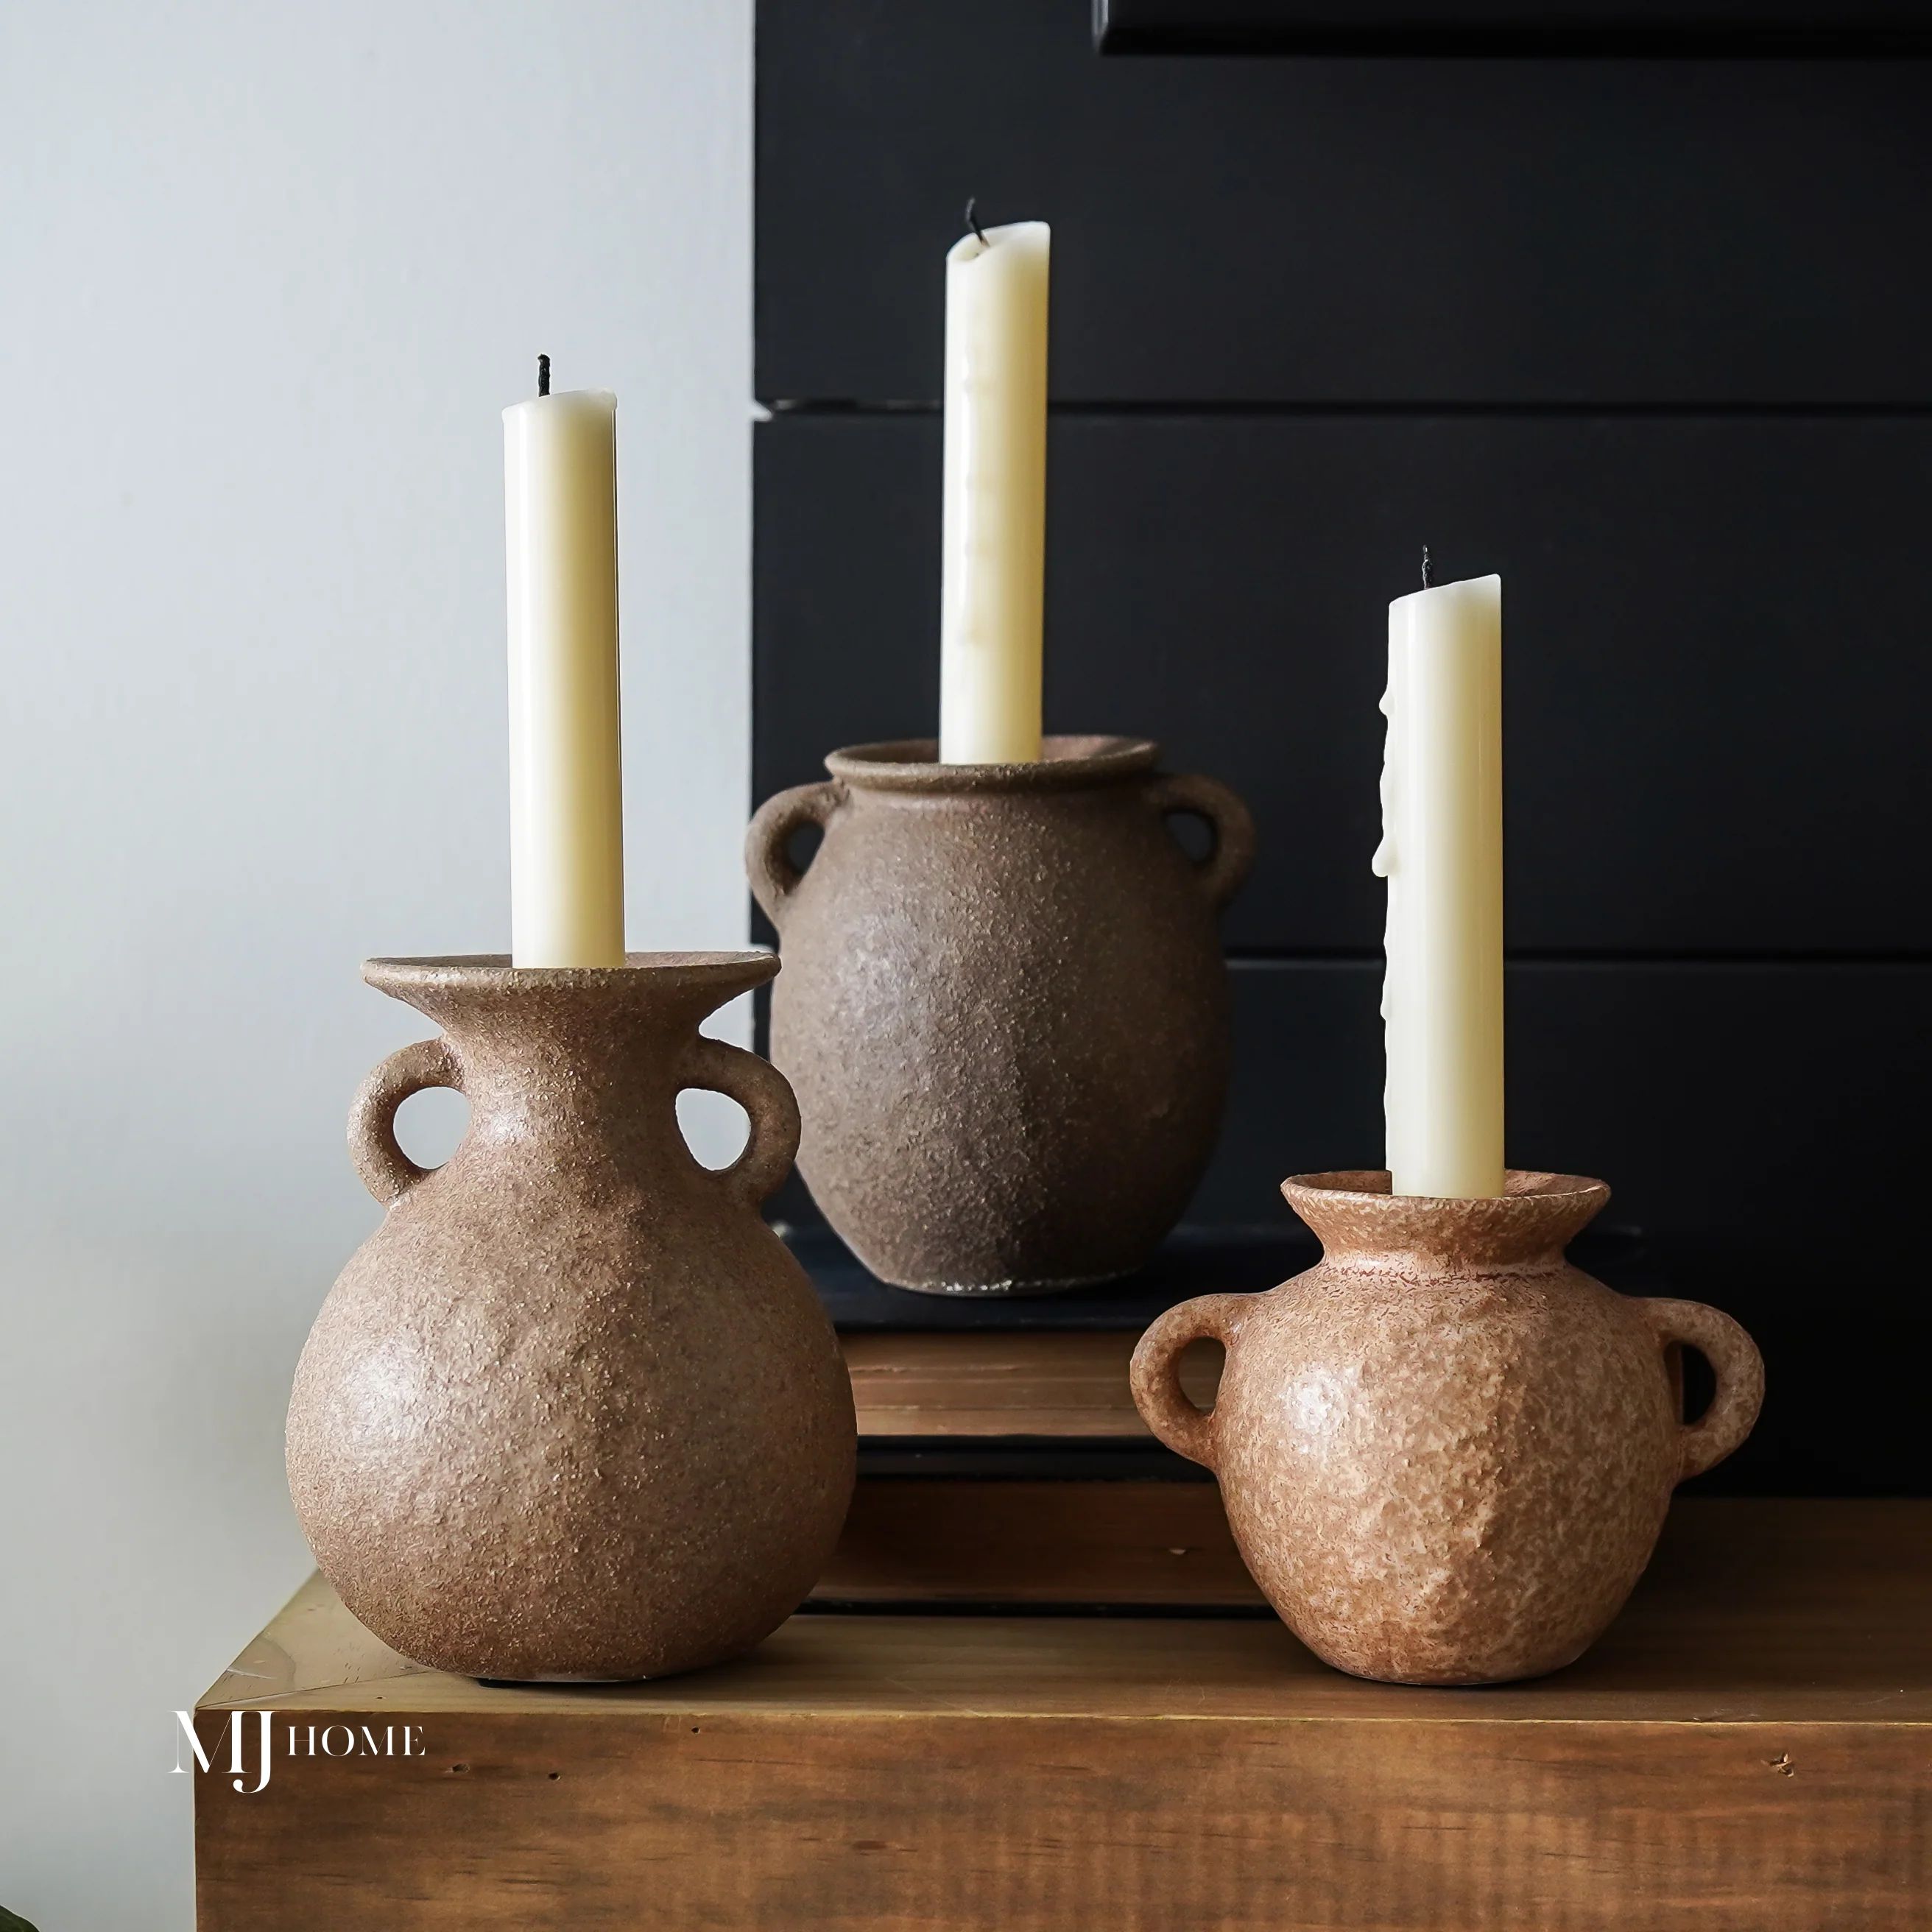 Larkin Rounded Candle Holders | Set of 3 | MJHome